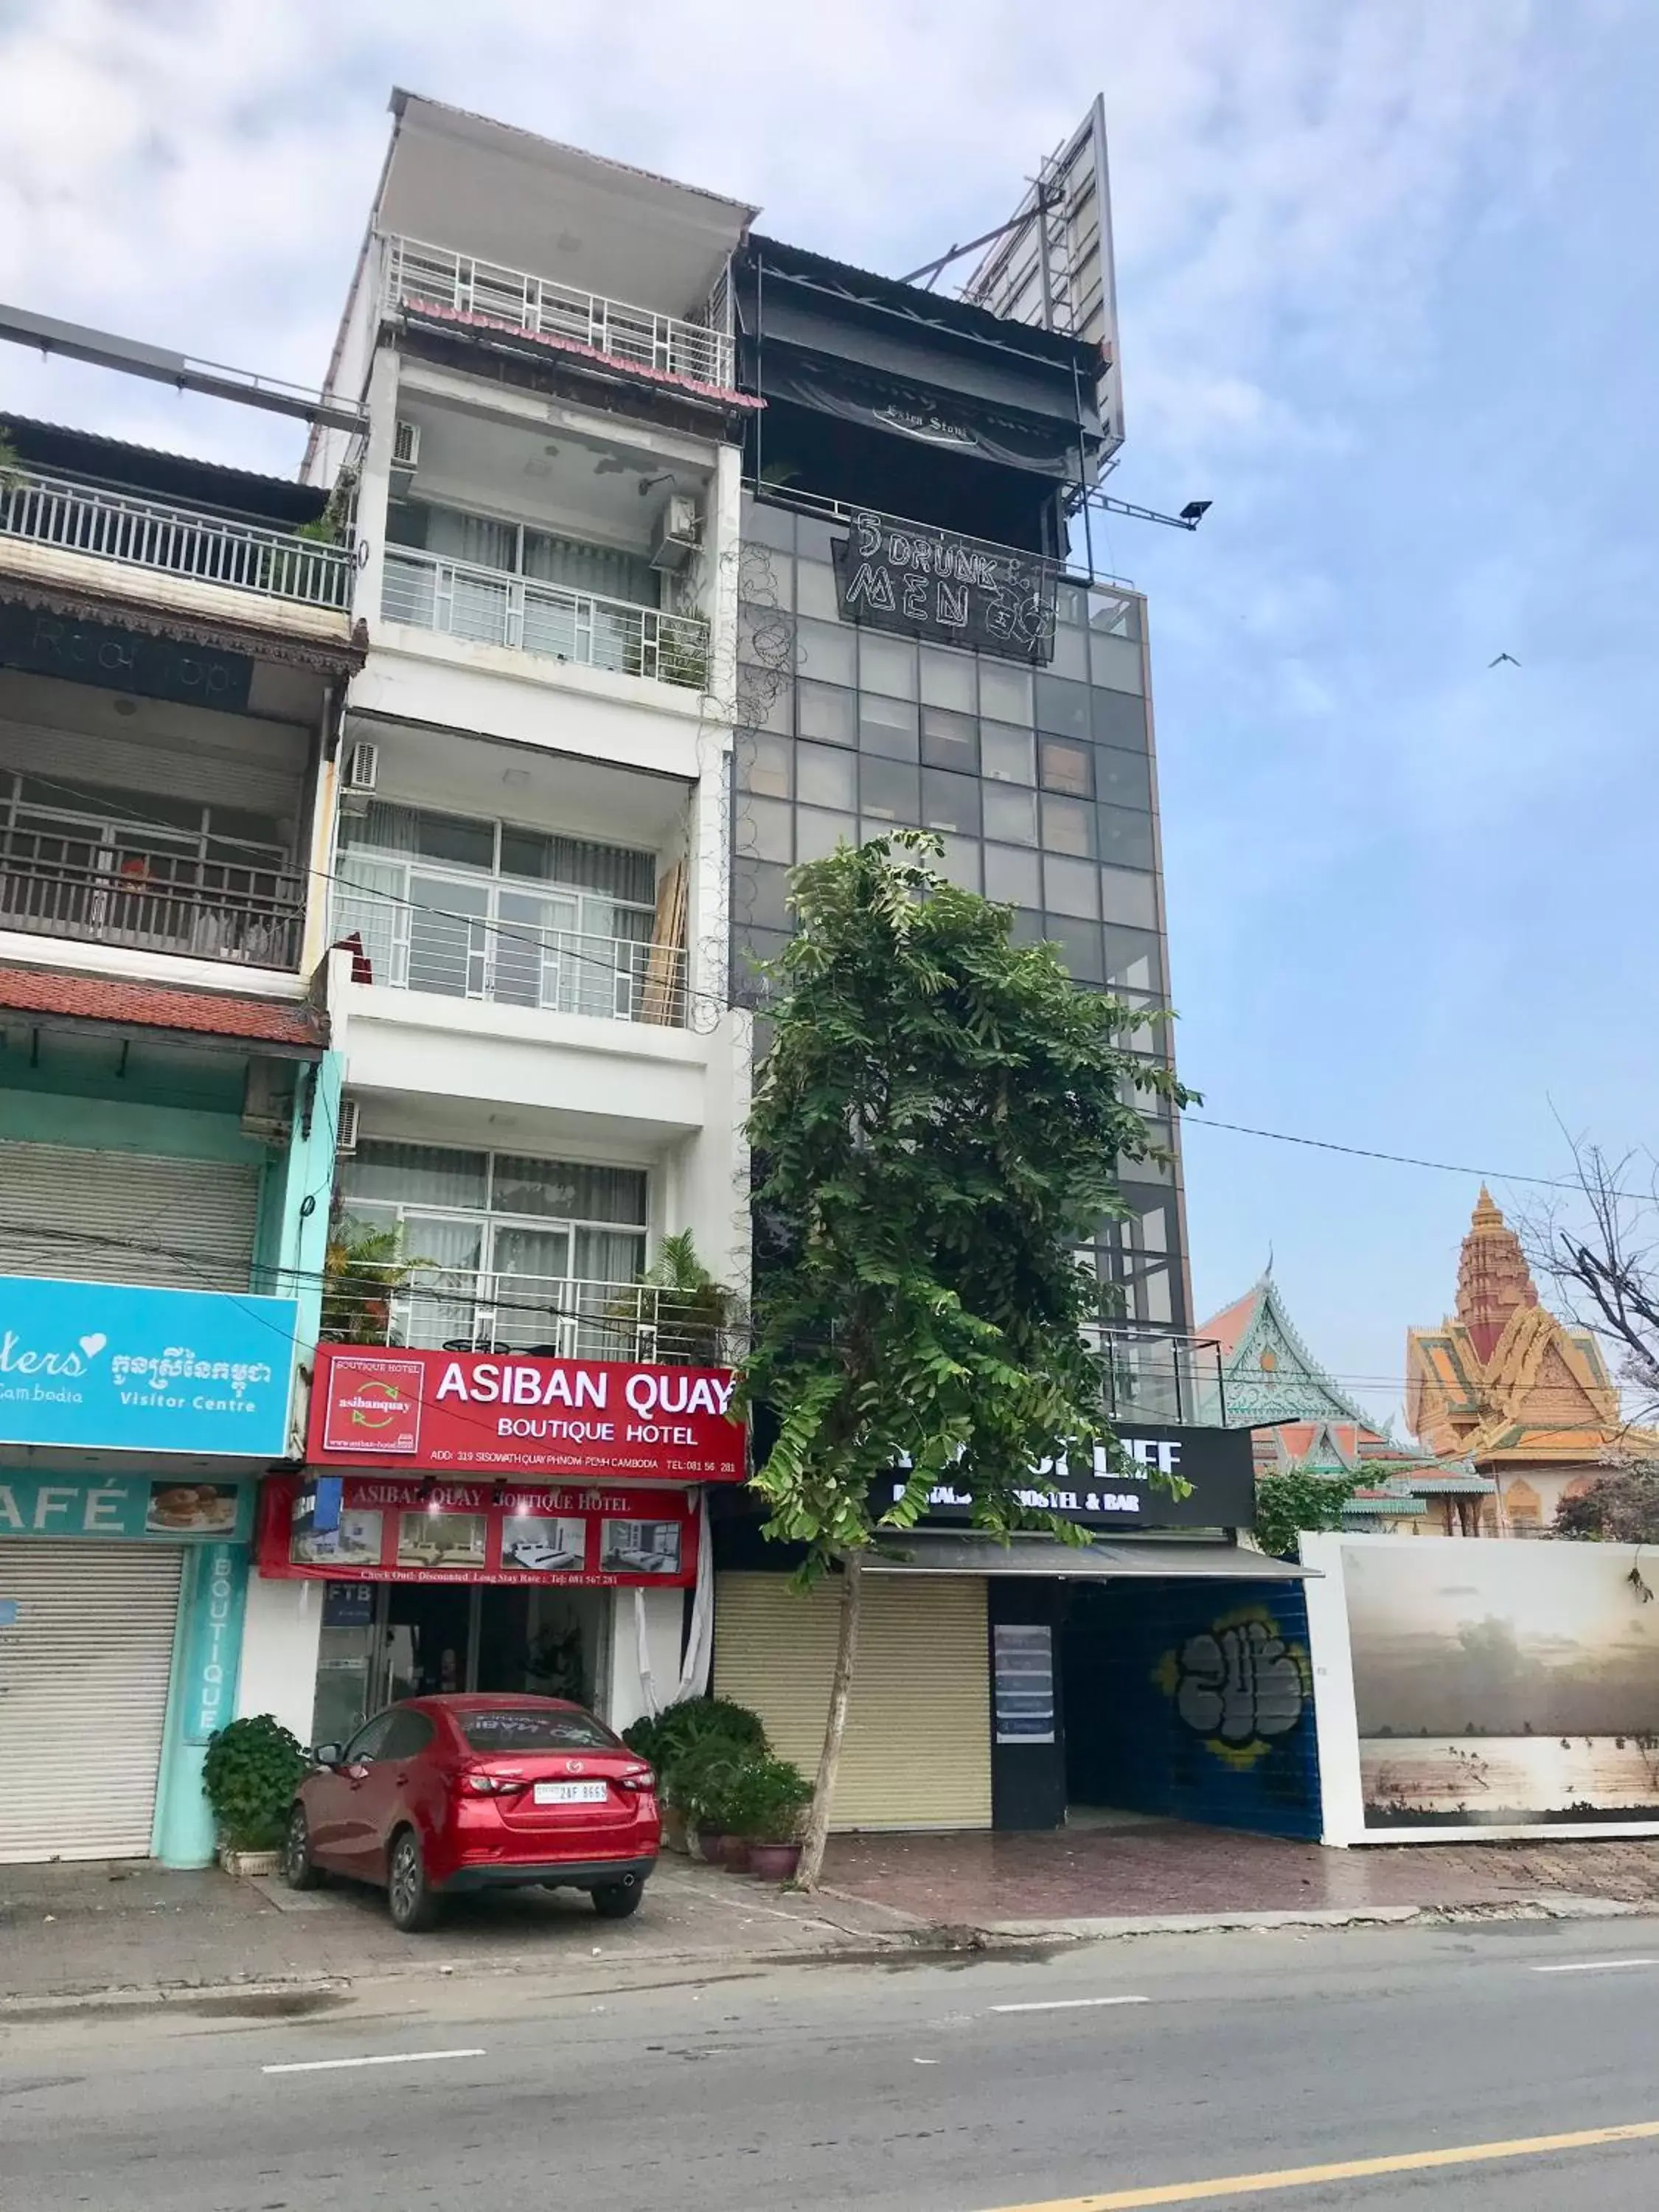 Property Building in Asiban Quay Boutique Hotel